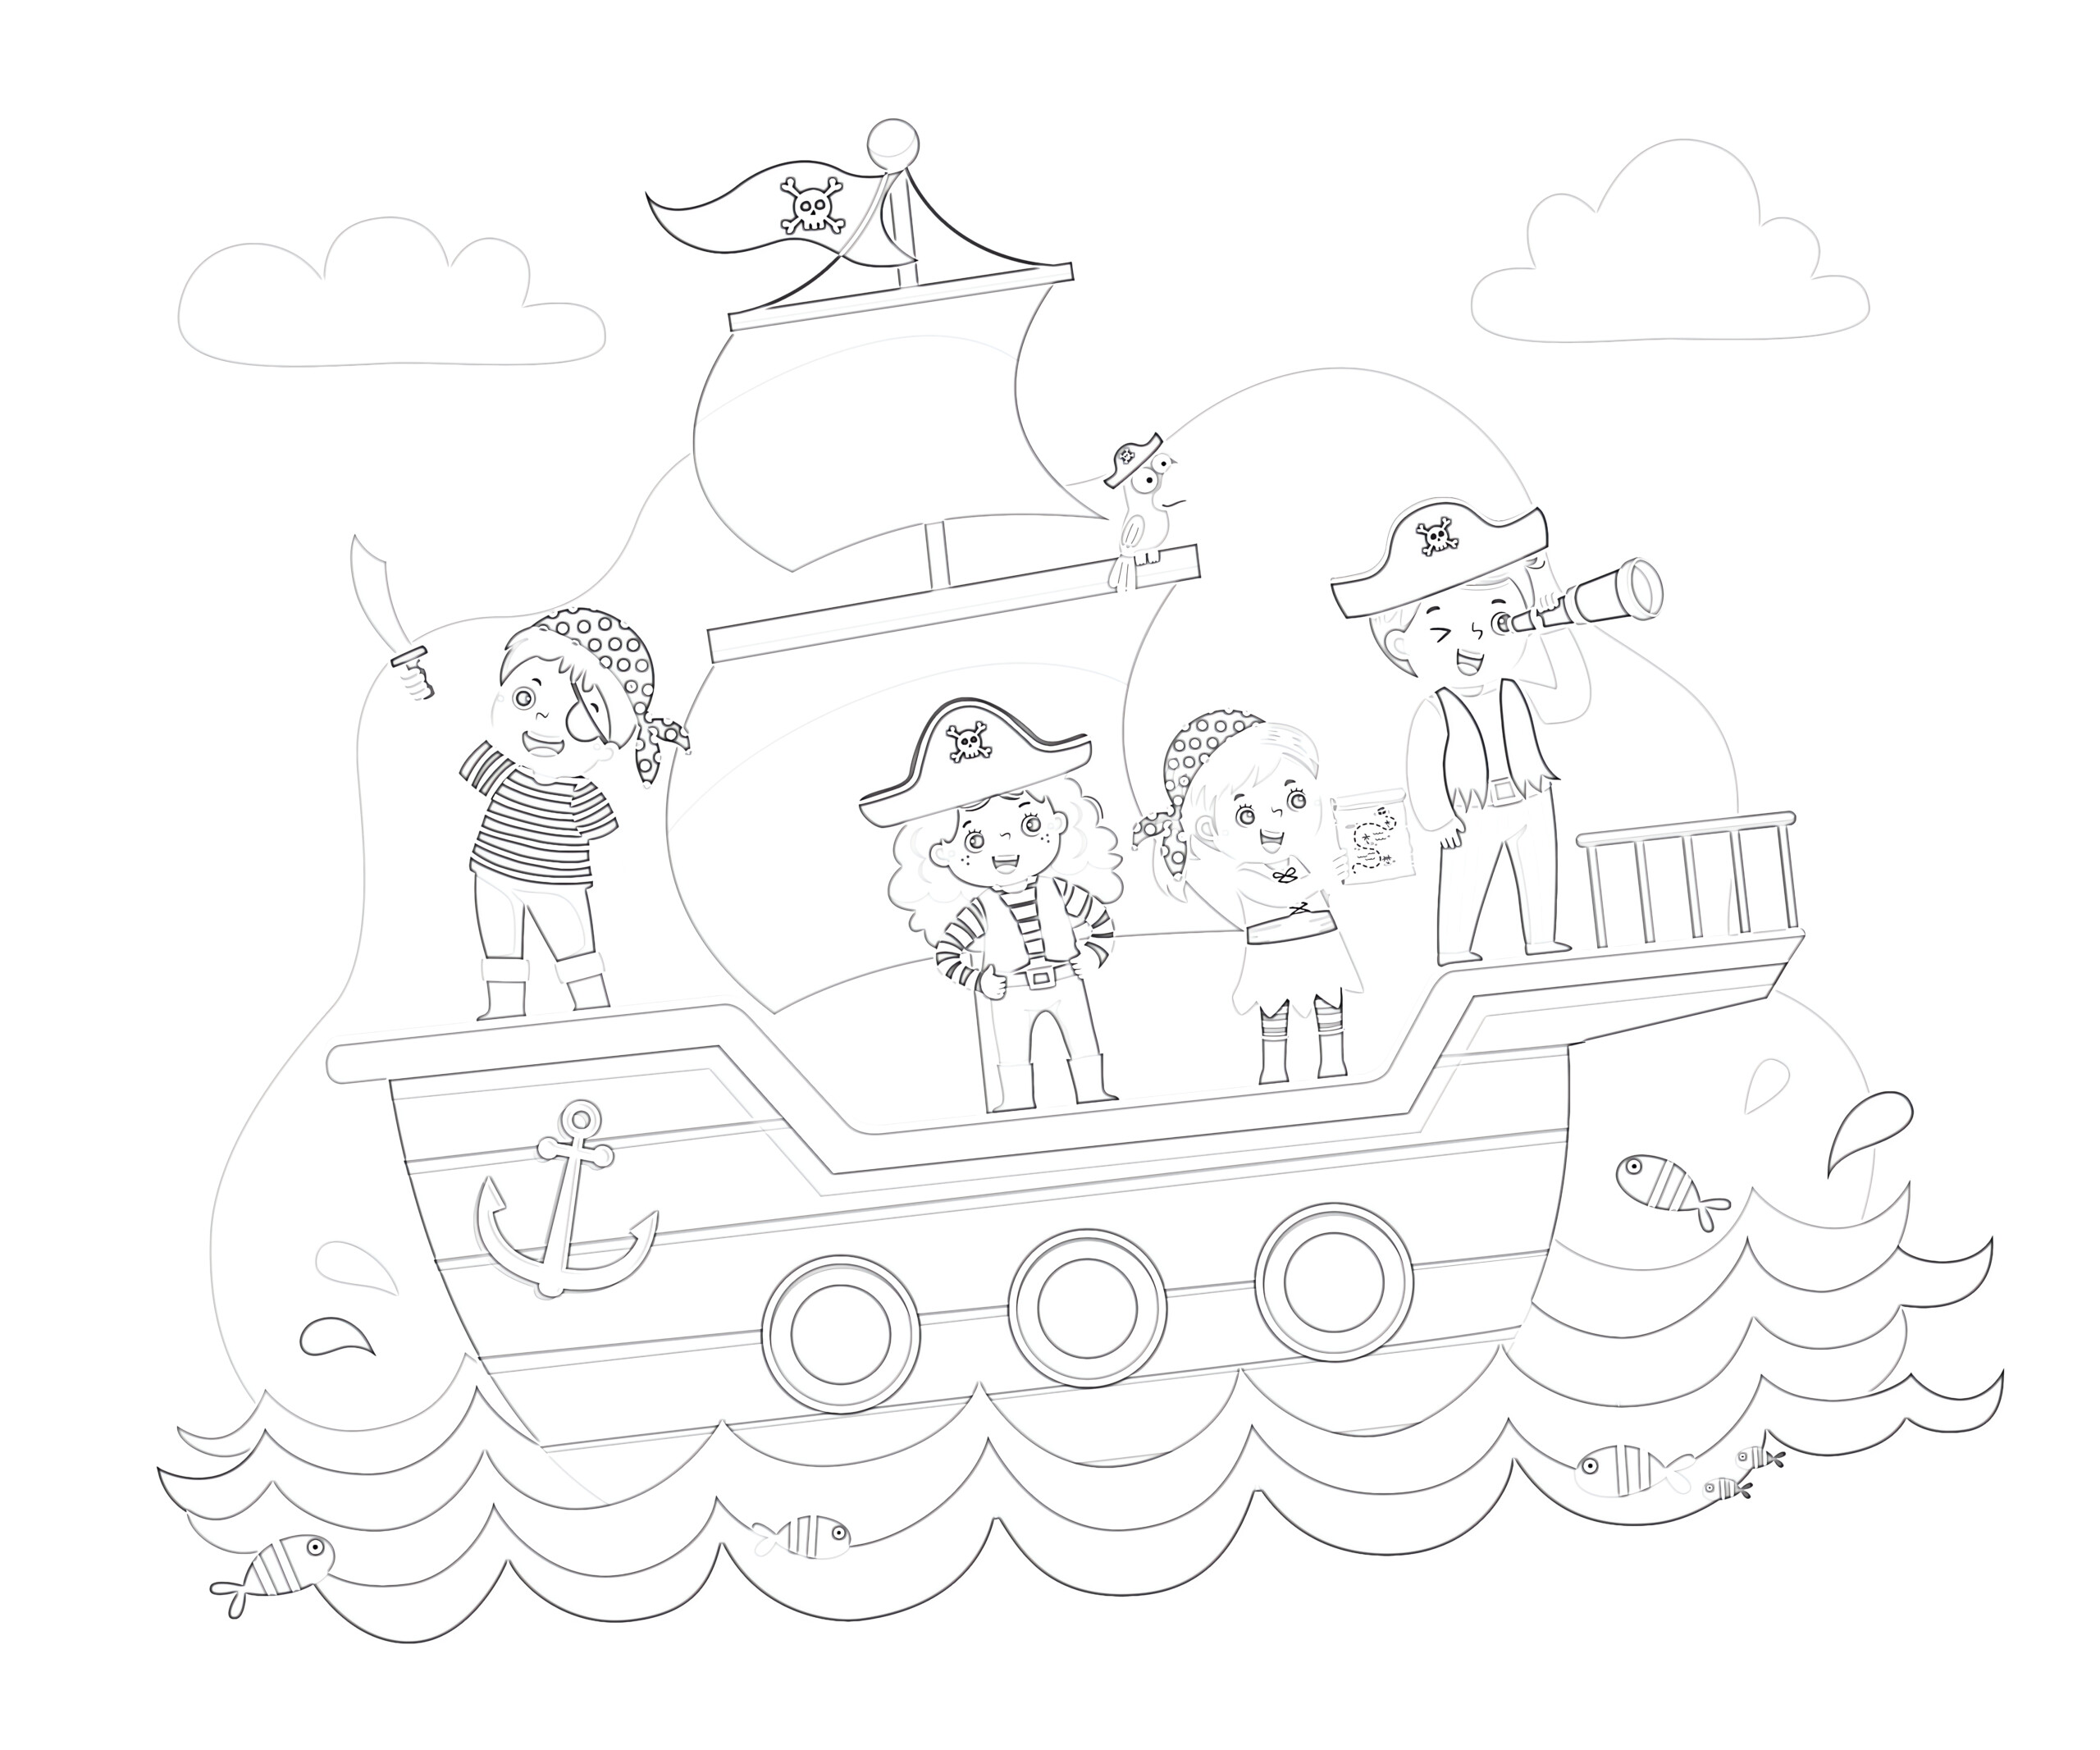 Pirates On The Ship - Coloring page